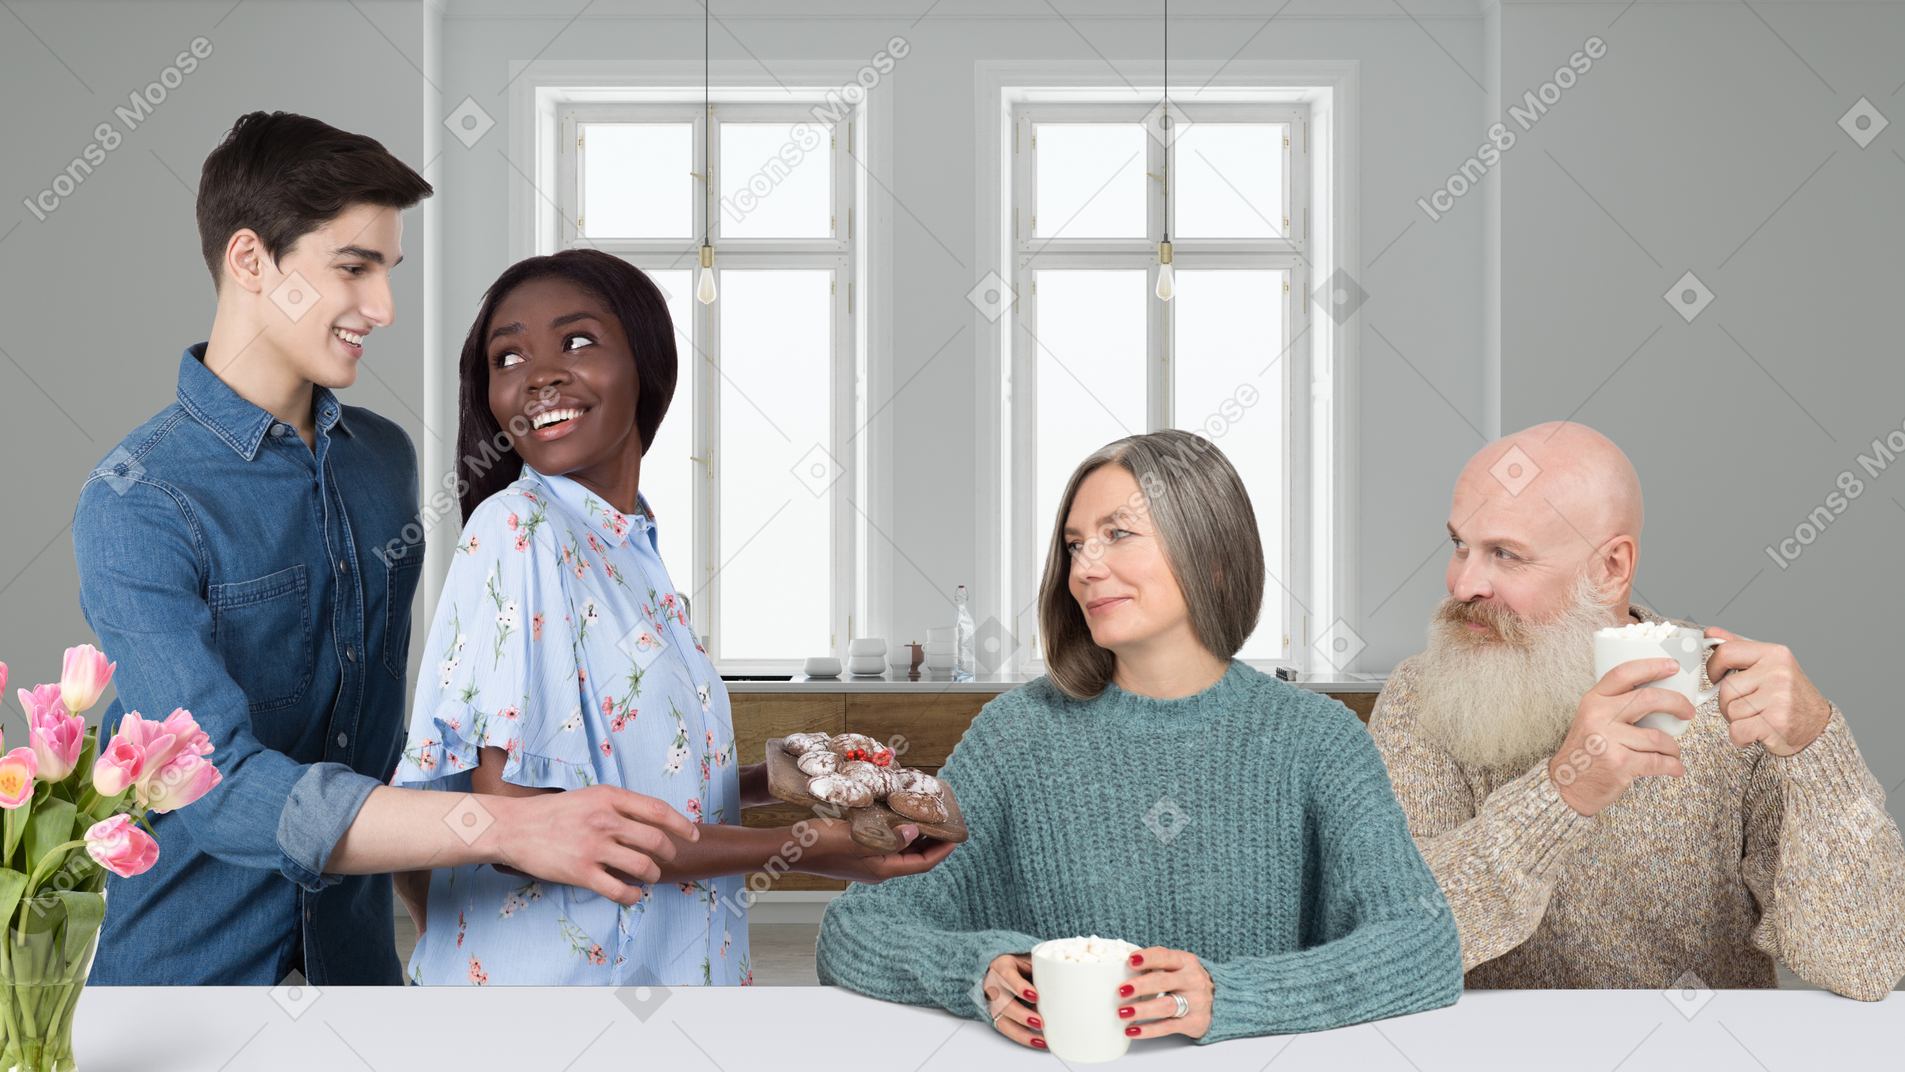 Young couple standing next to elderly couple sitting at table